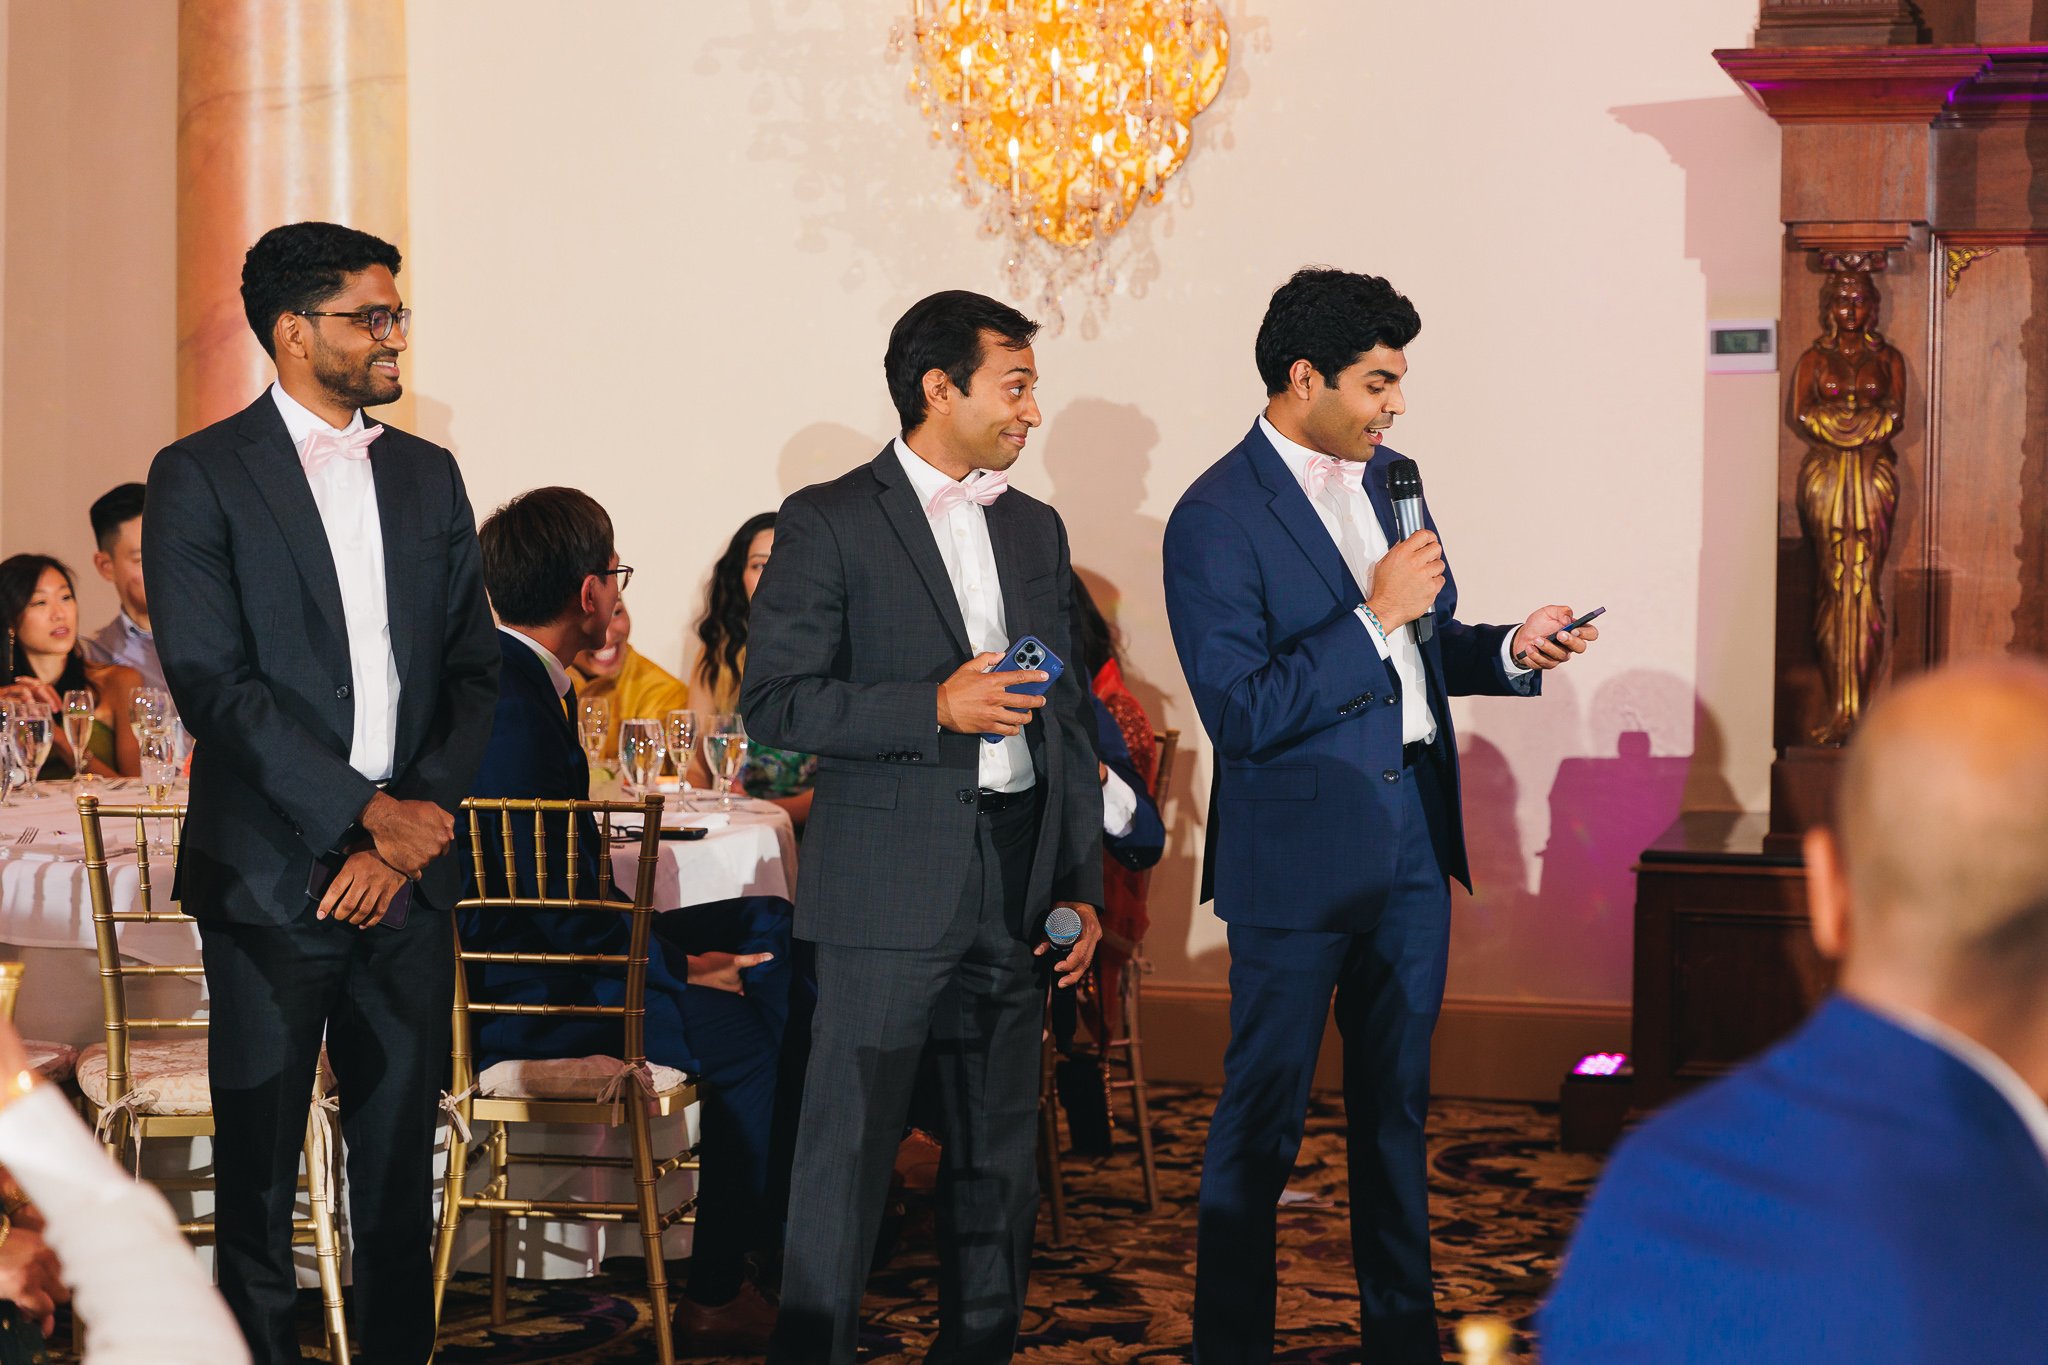 Groom's men giving a toast during reception